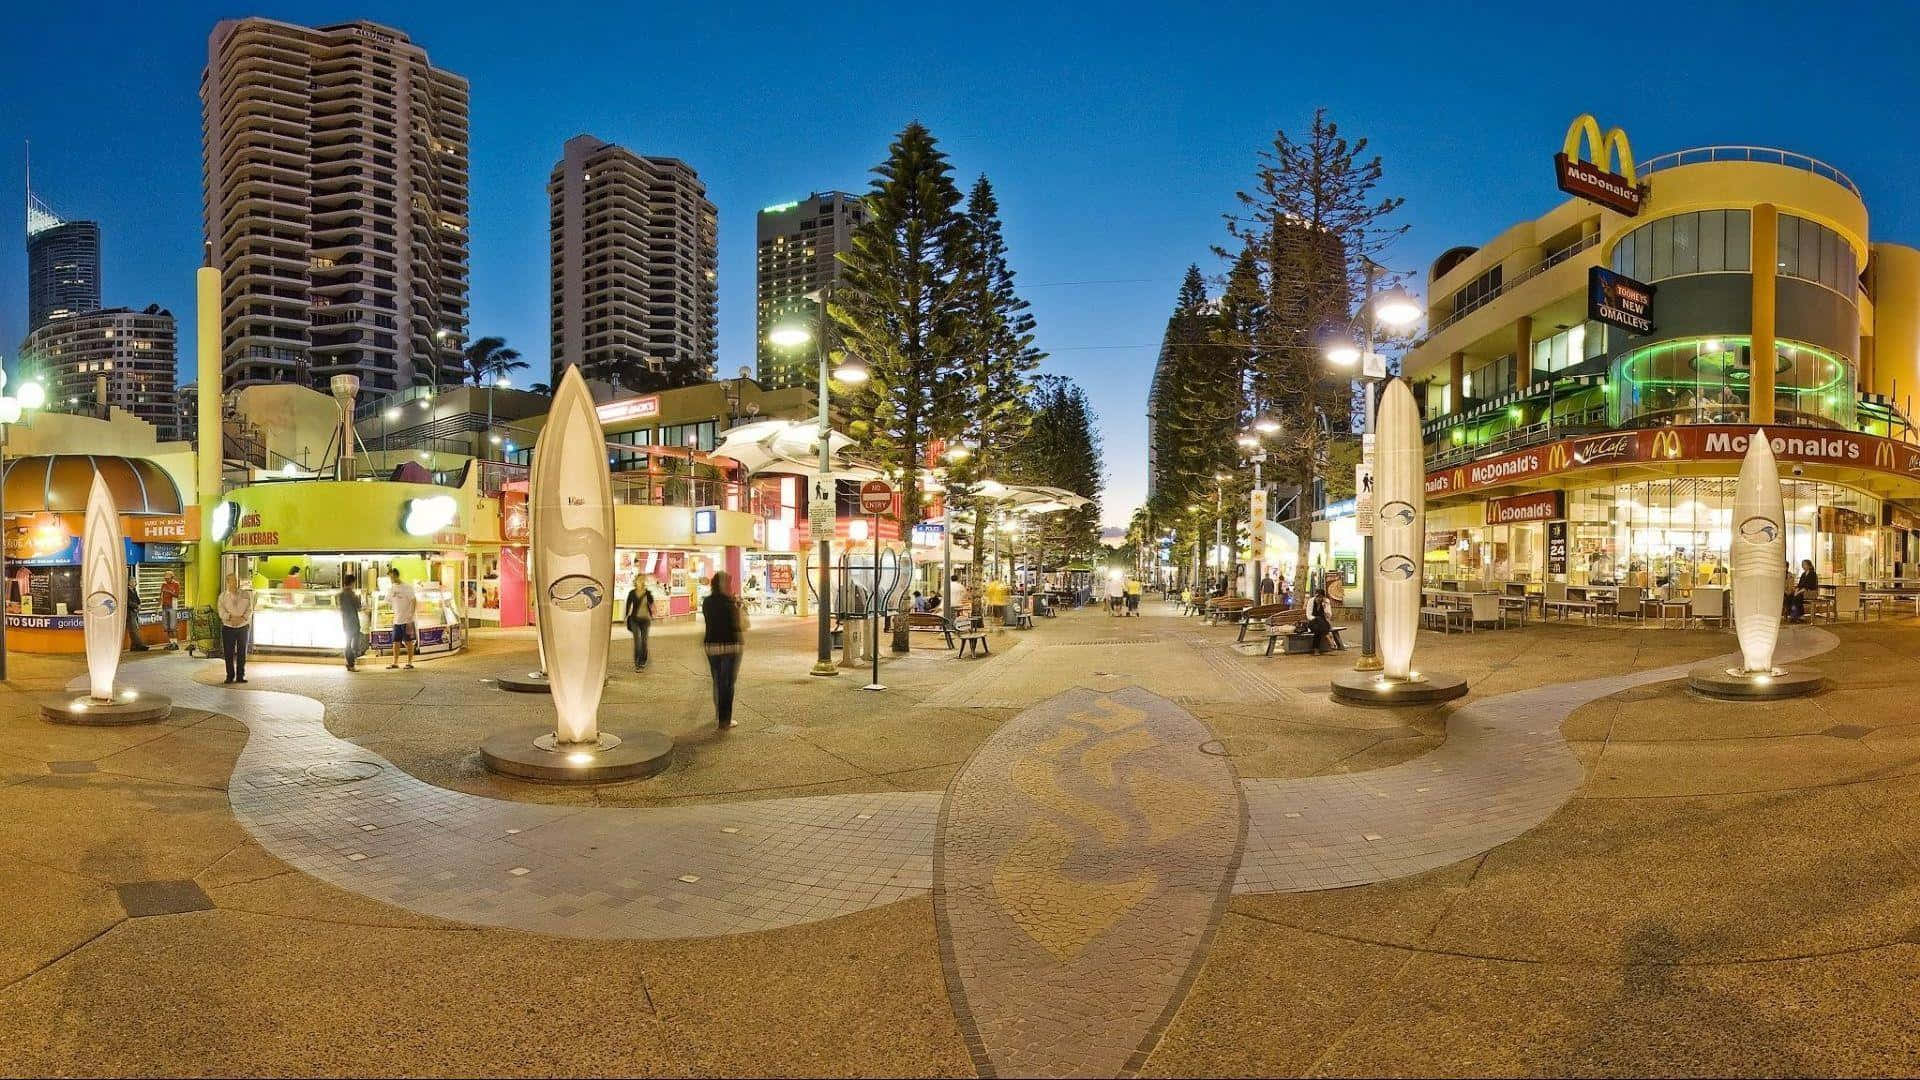 A 360 Degree View Of A City Street At Night